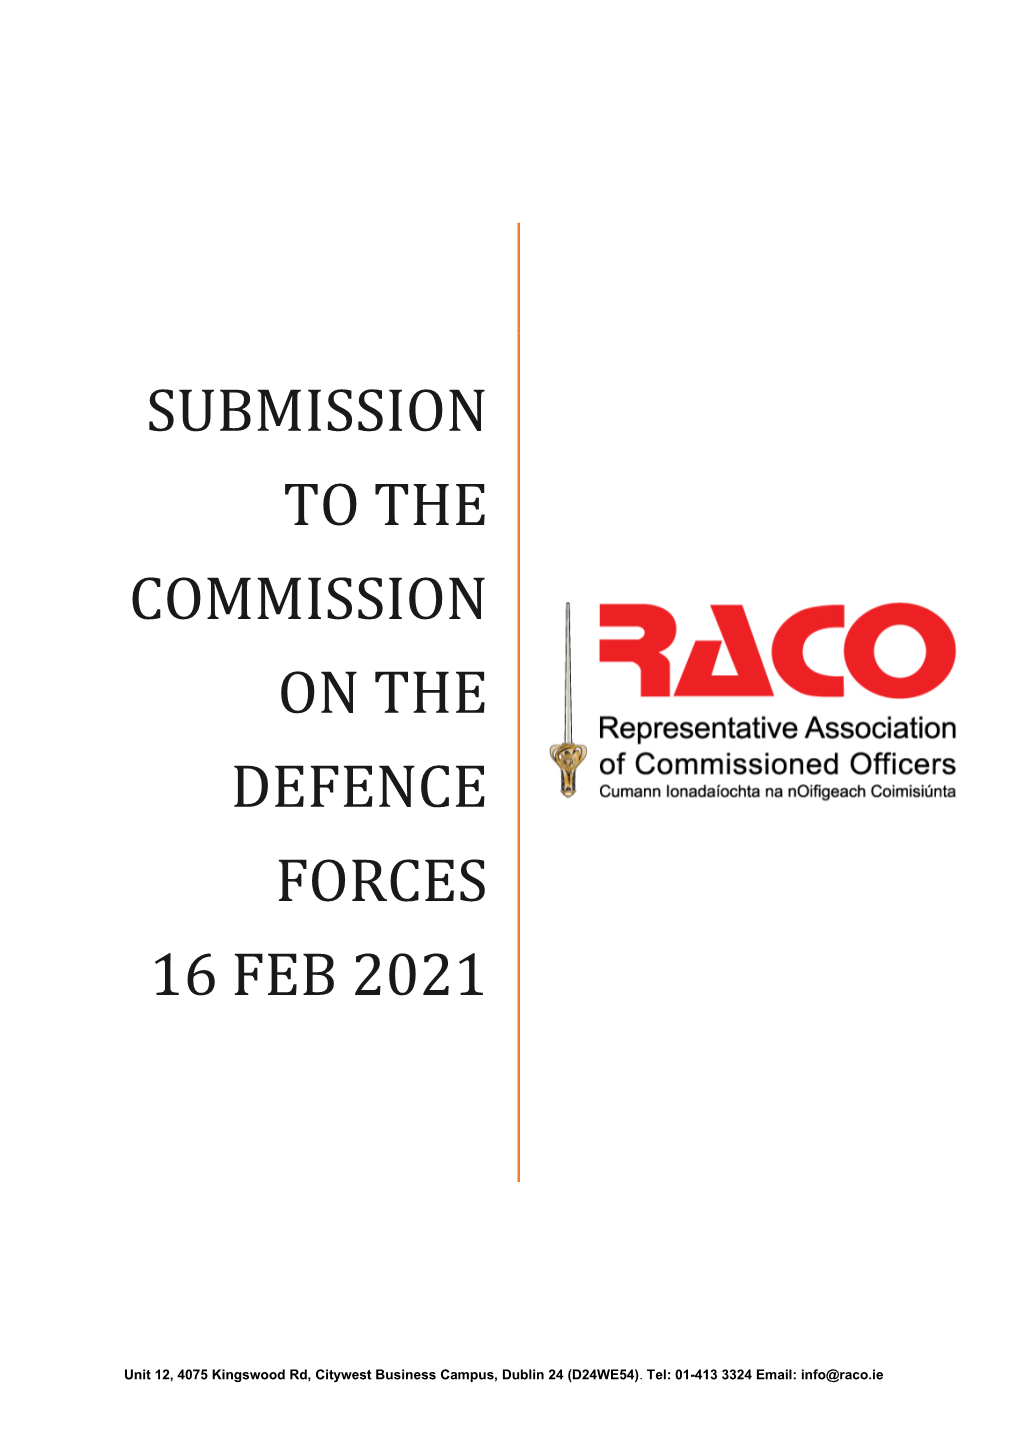 SUBMISSION to the Commission on the Defence Forces 16 Feb 2021